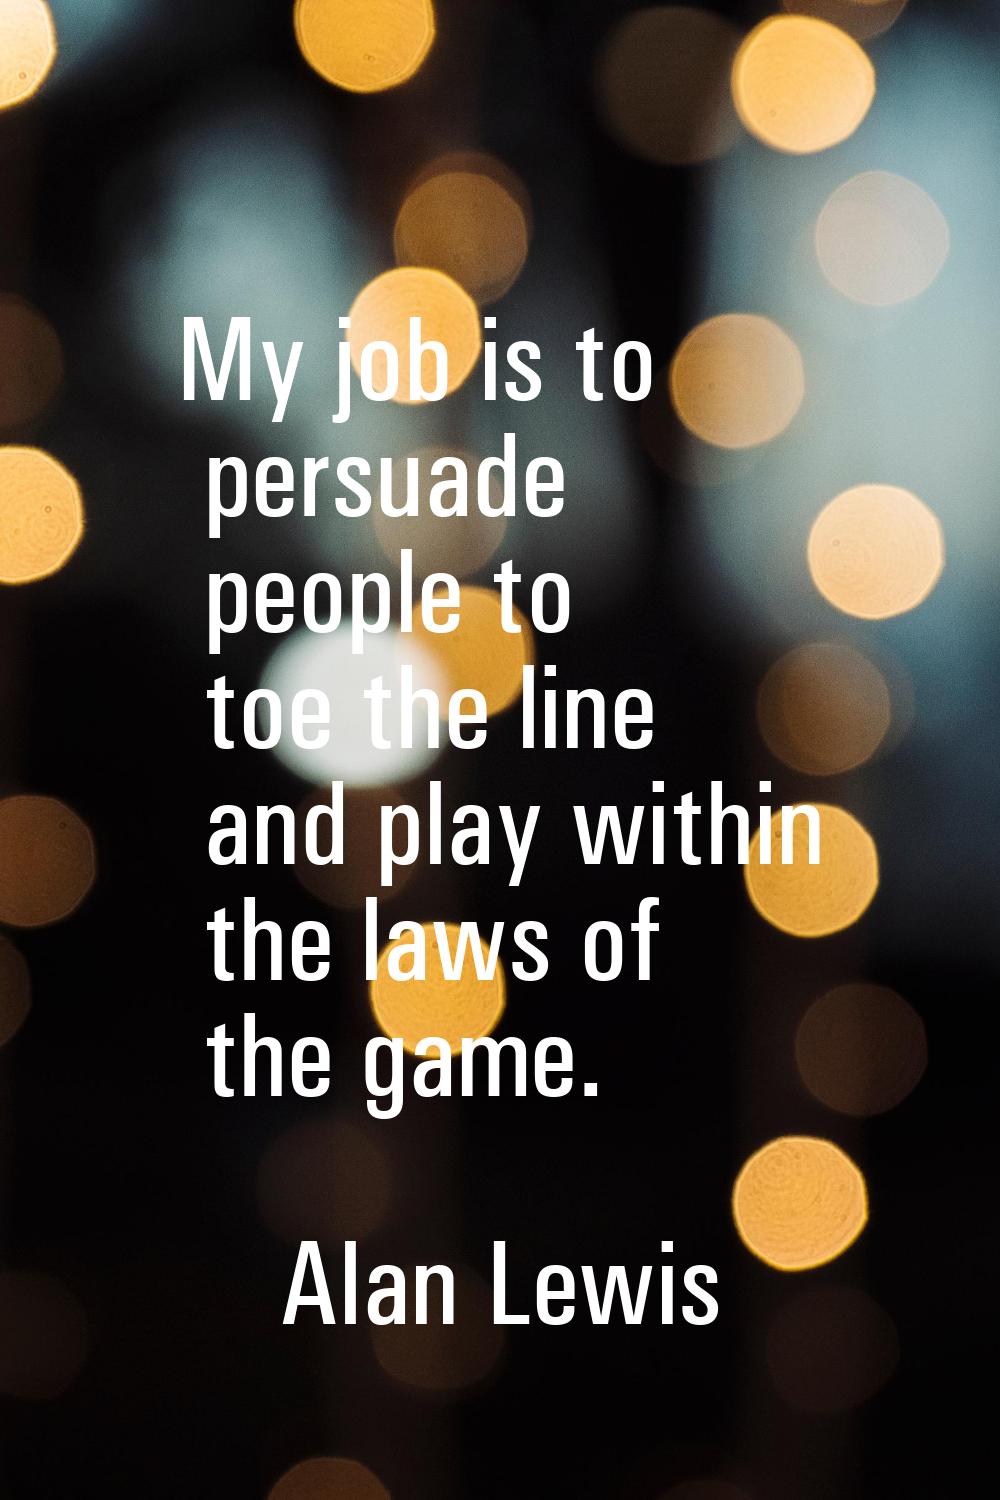 My job is to persuade people to toe the line and play within the laws of the game.